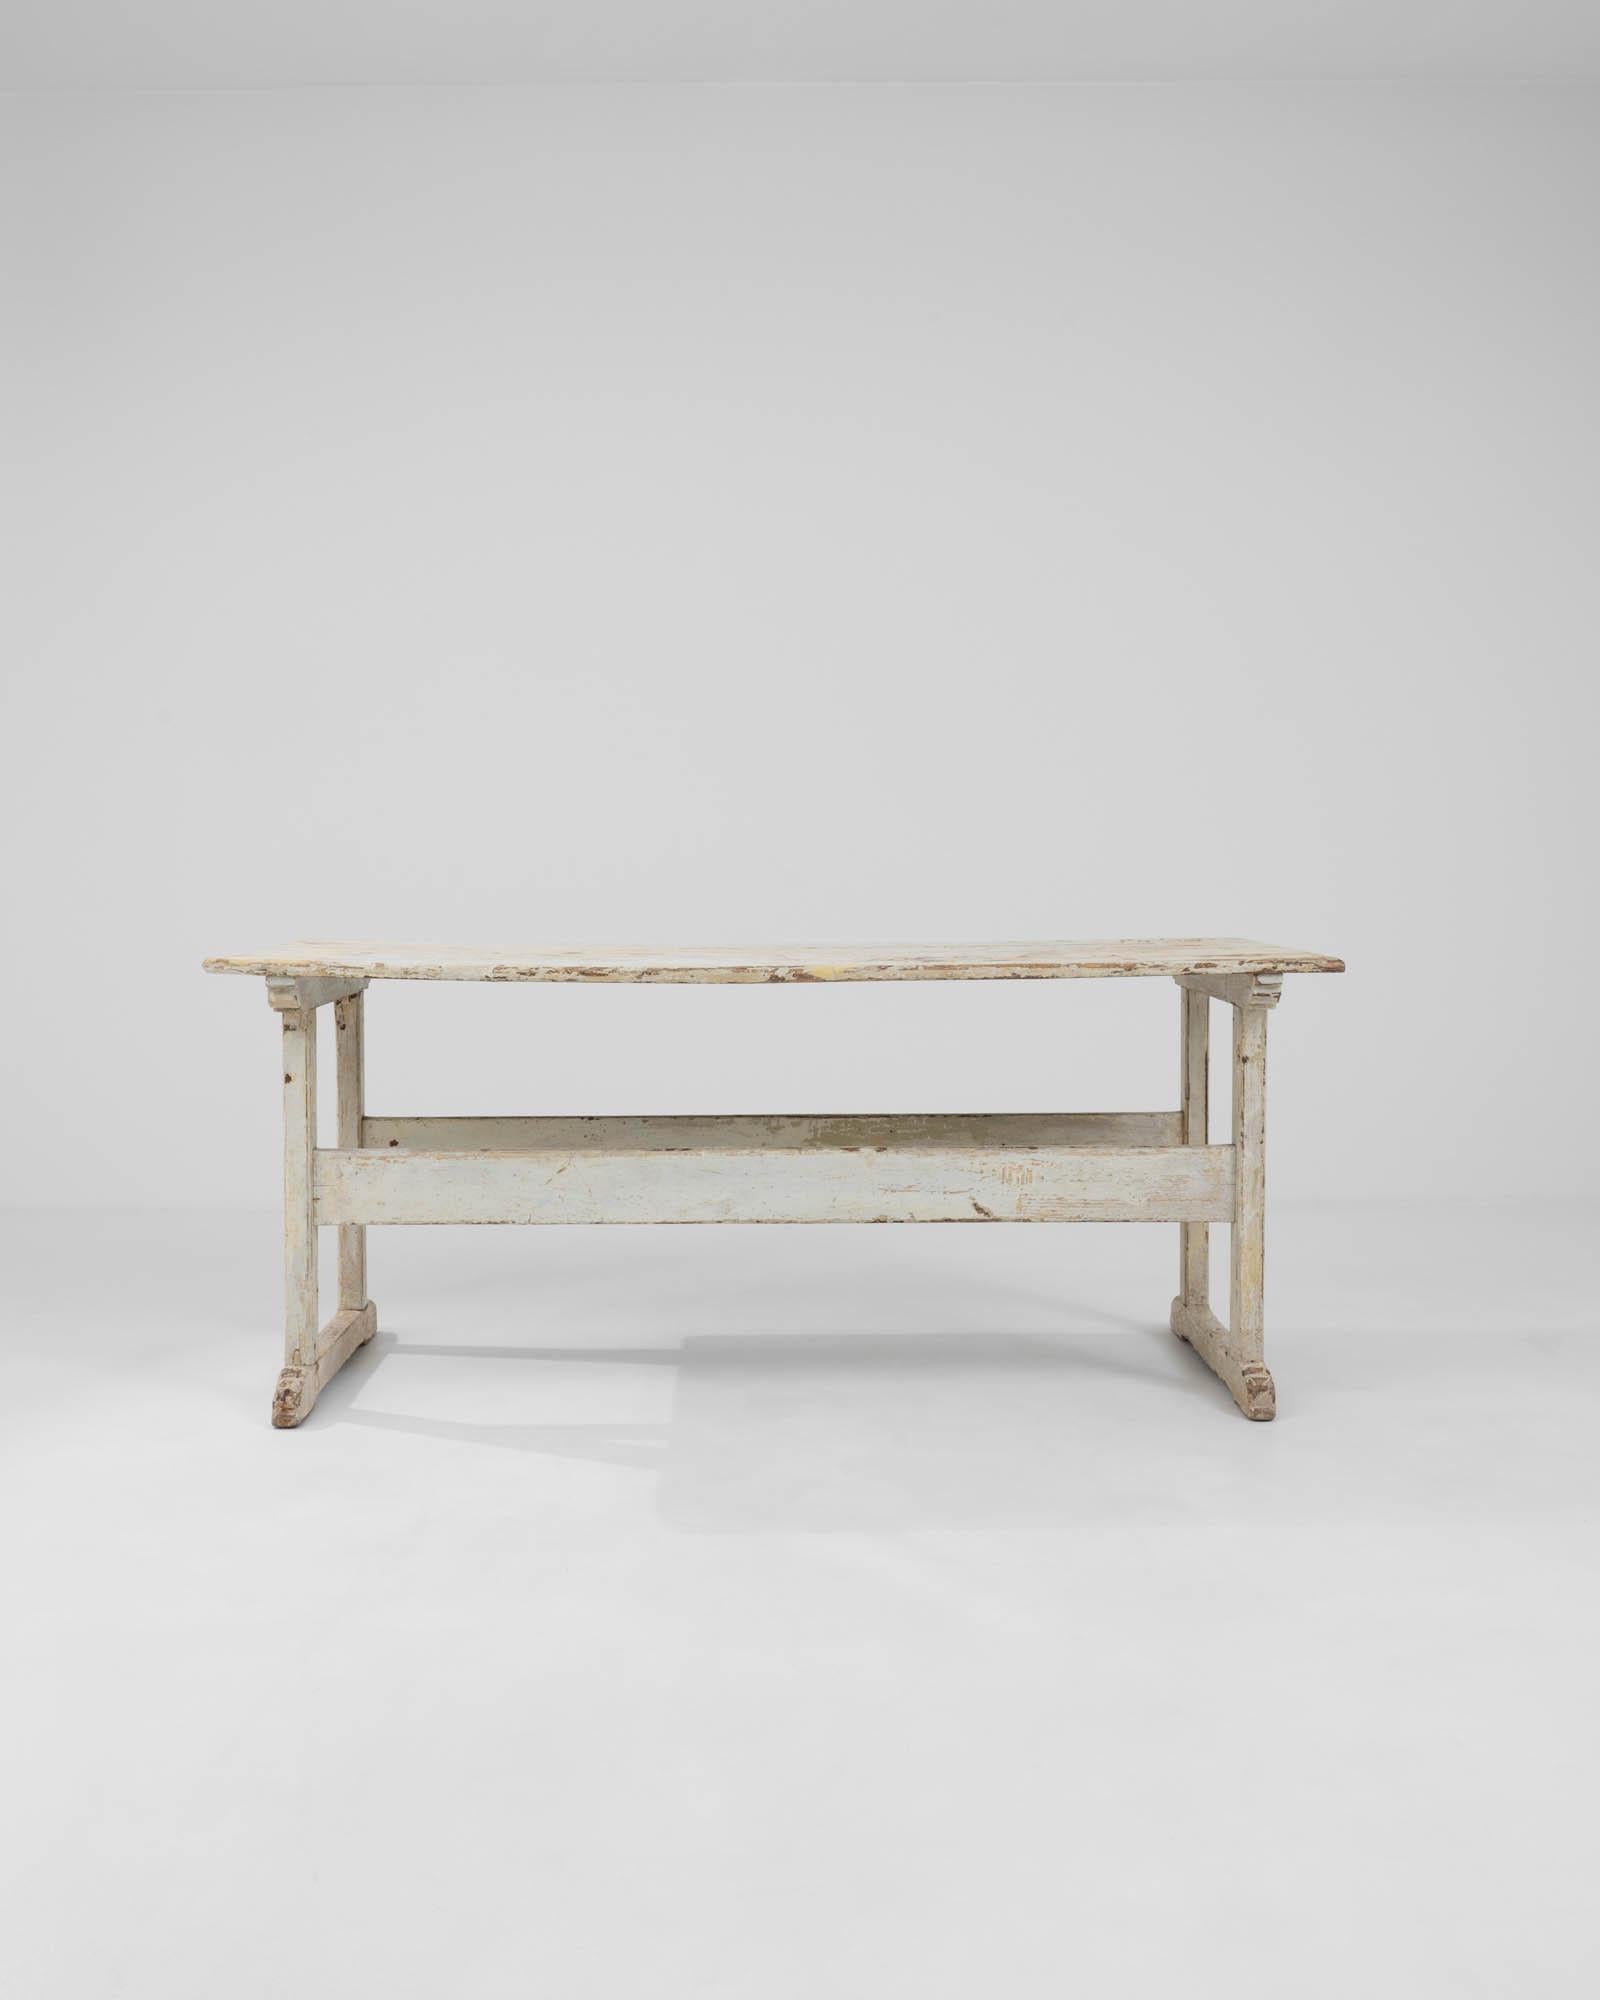 Imbued with a sense of rustic nostalgia, this early 1900s Central European wood table is a splendid artifact of simpler times. The white patinated finish, weathered through decades, reveals a story in every scratch and layer, inviting a touch of